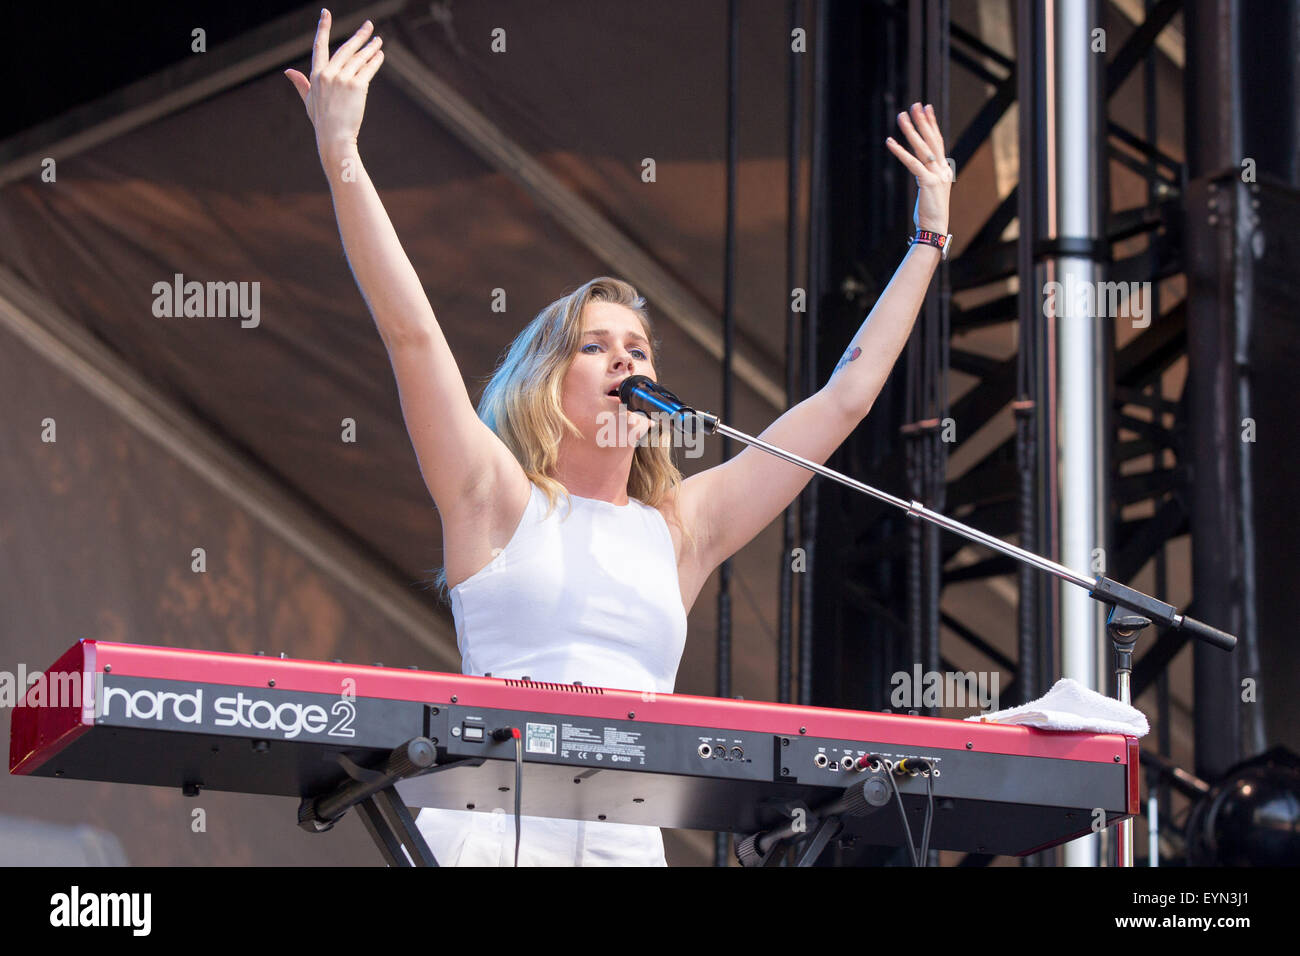 Chicago, Illinois, USA. 31st July, 2015. Singer GEORGIA NOTT of Broods performs live in Grant Park at the Lollapalooza Music Festival in Chicago, Illinois © Daniel DeSlover/ZUMA Wire/Alamy Live News Stock Photo